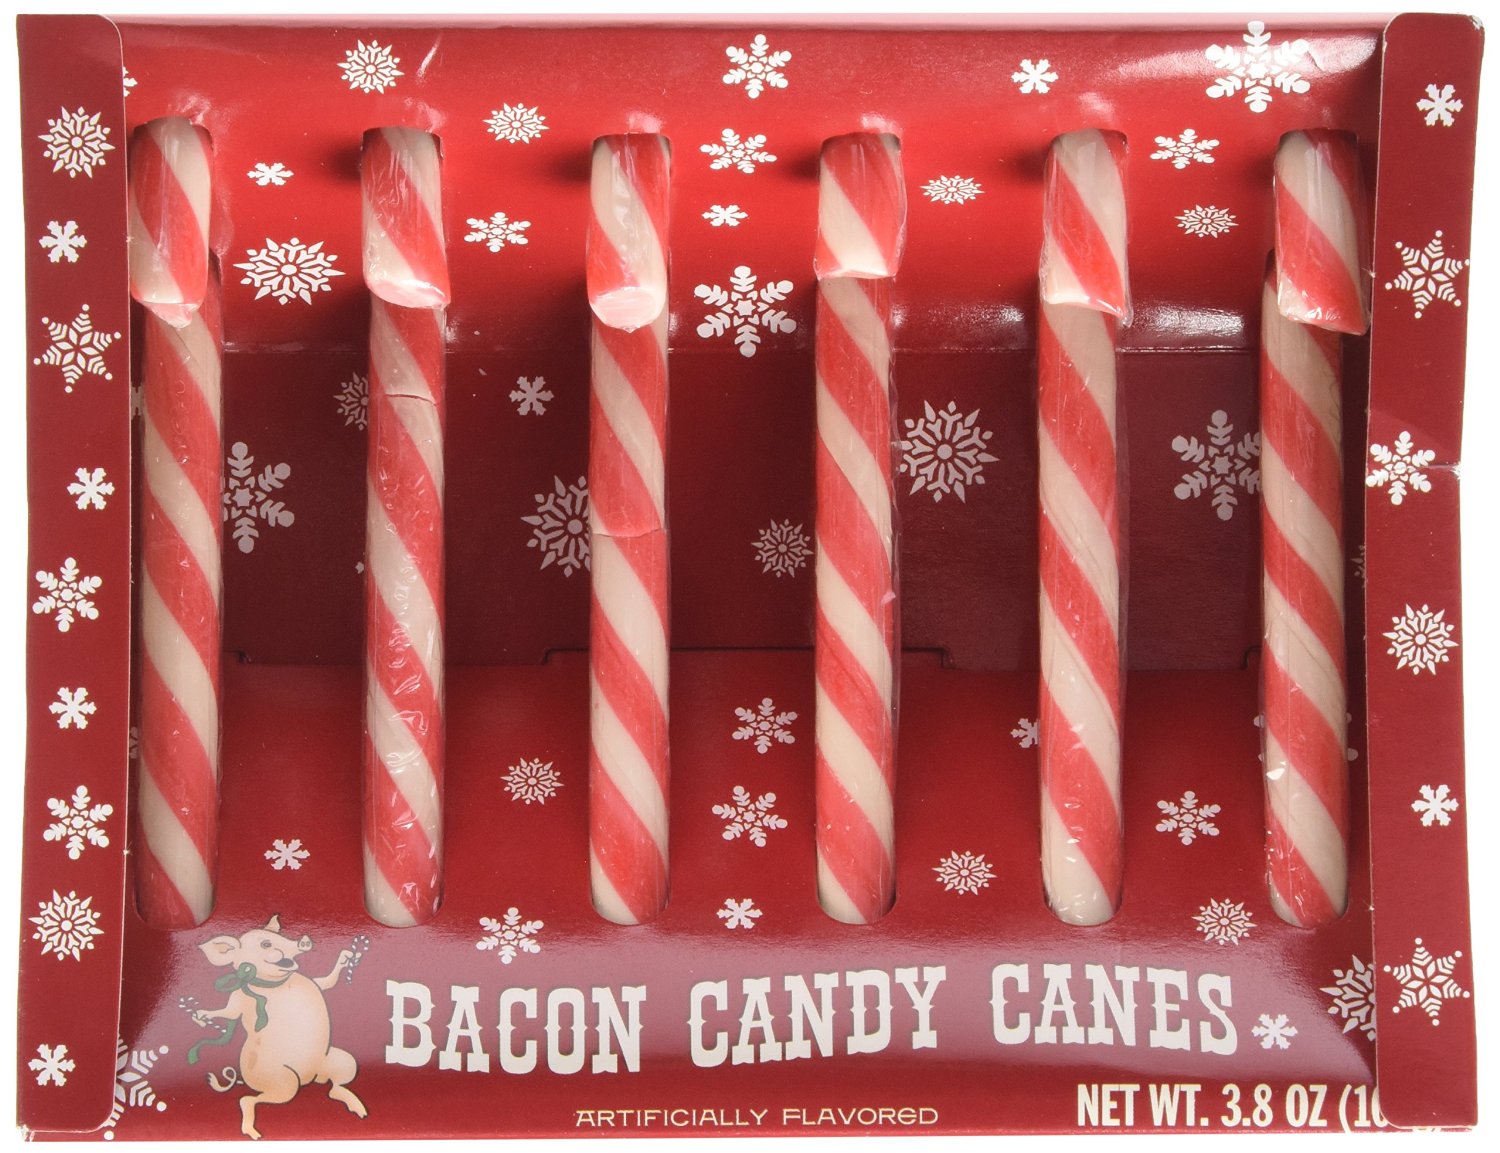 bacon-candy-canes-holiday-novelty-gag-gift-box-of-6